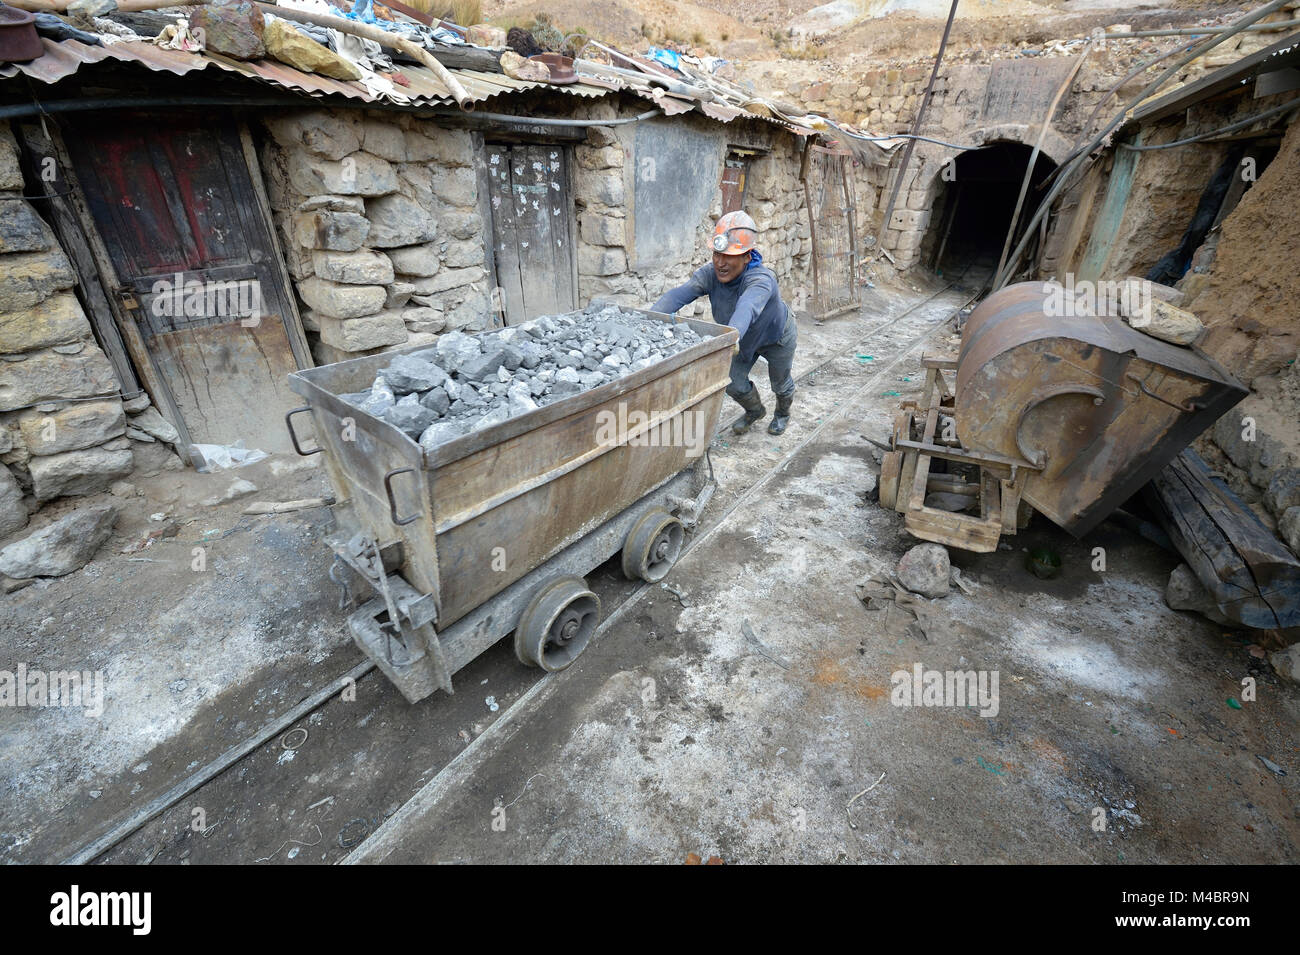 A miner moves an ore cart outside a mine in Potosi, Bolivia. The mine produces silver and other metals. Stock Photo